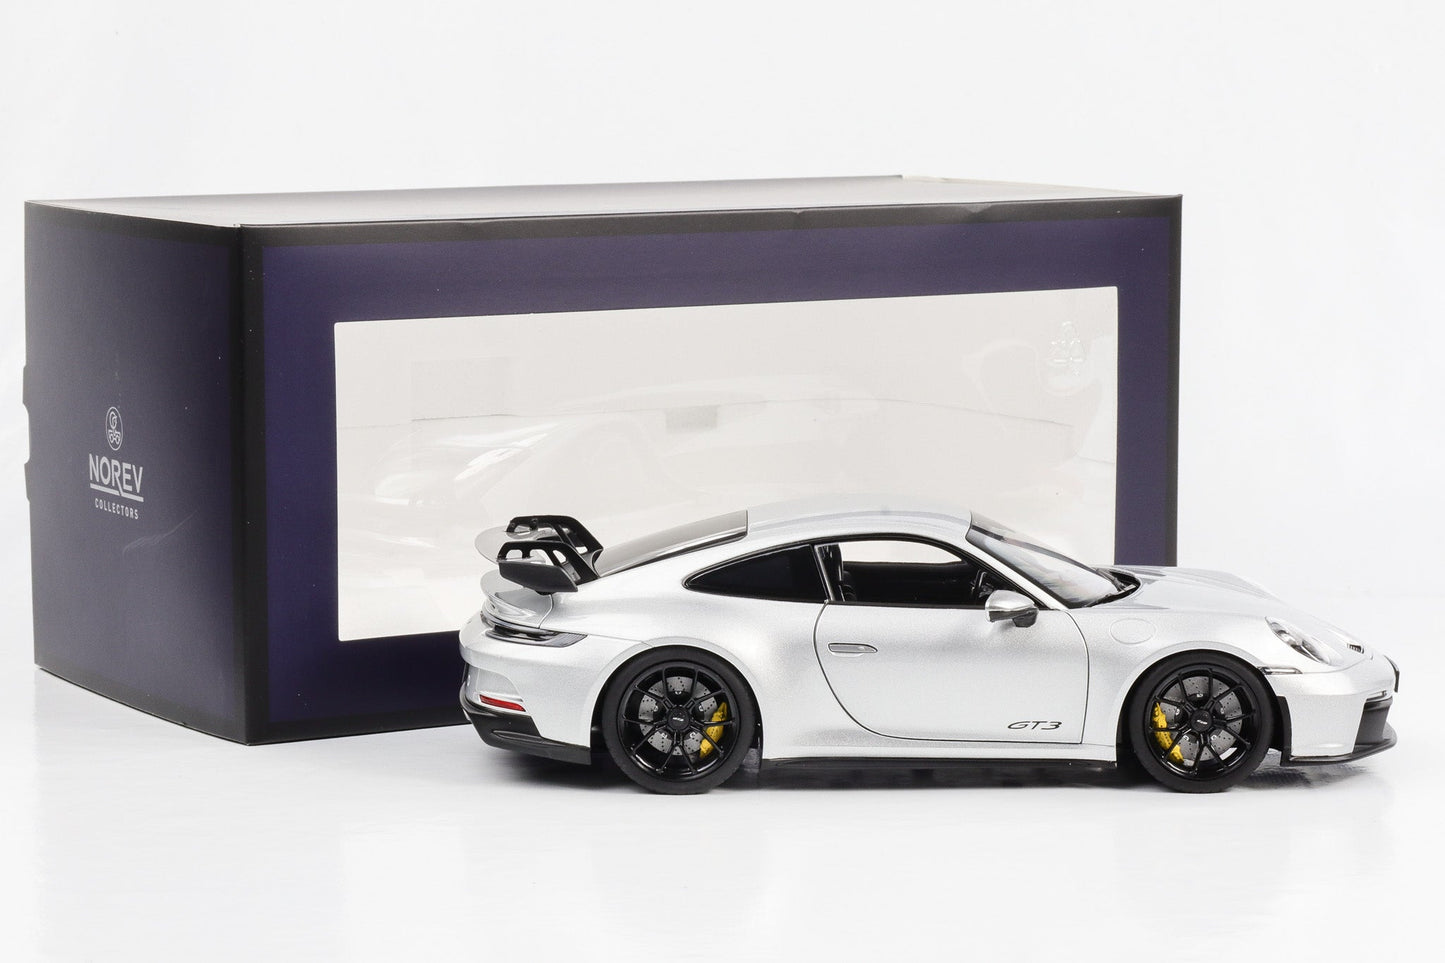 1:18 Porsche 911 992 GT3 2021 silver full opening Norev 187380 limited